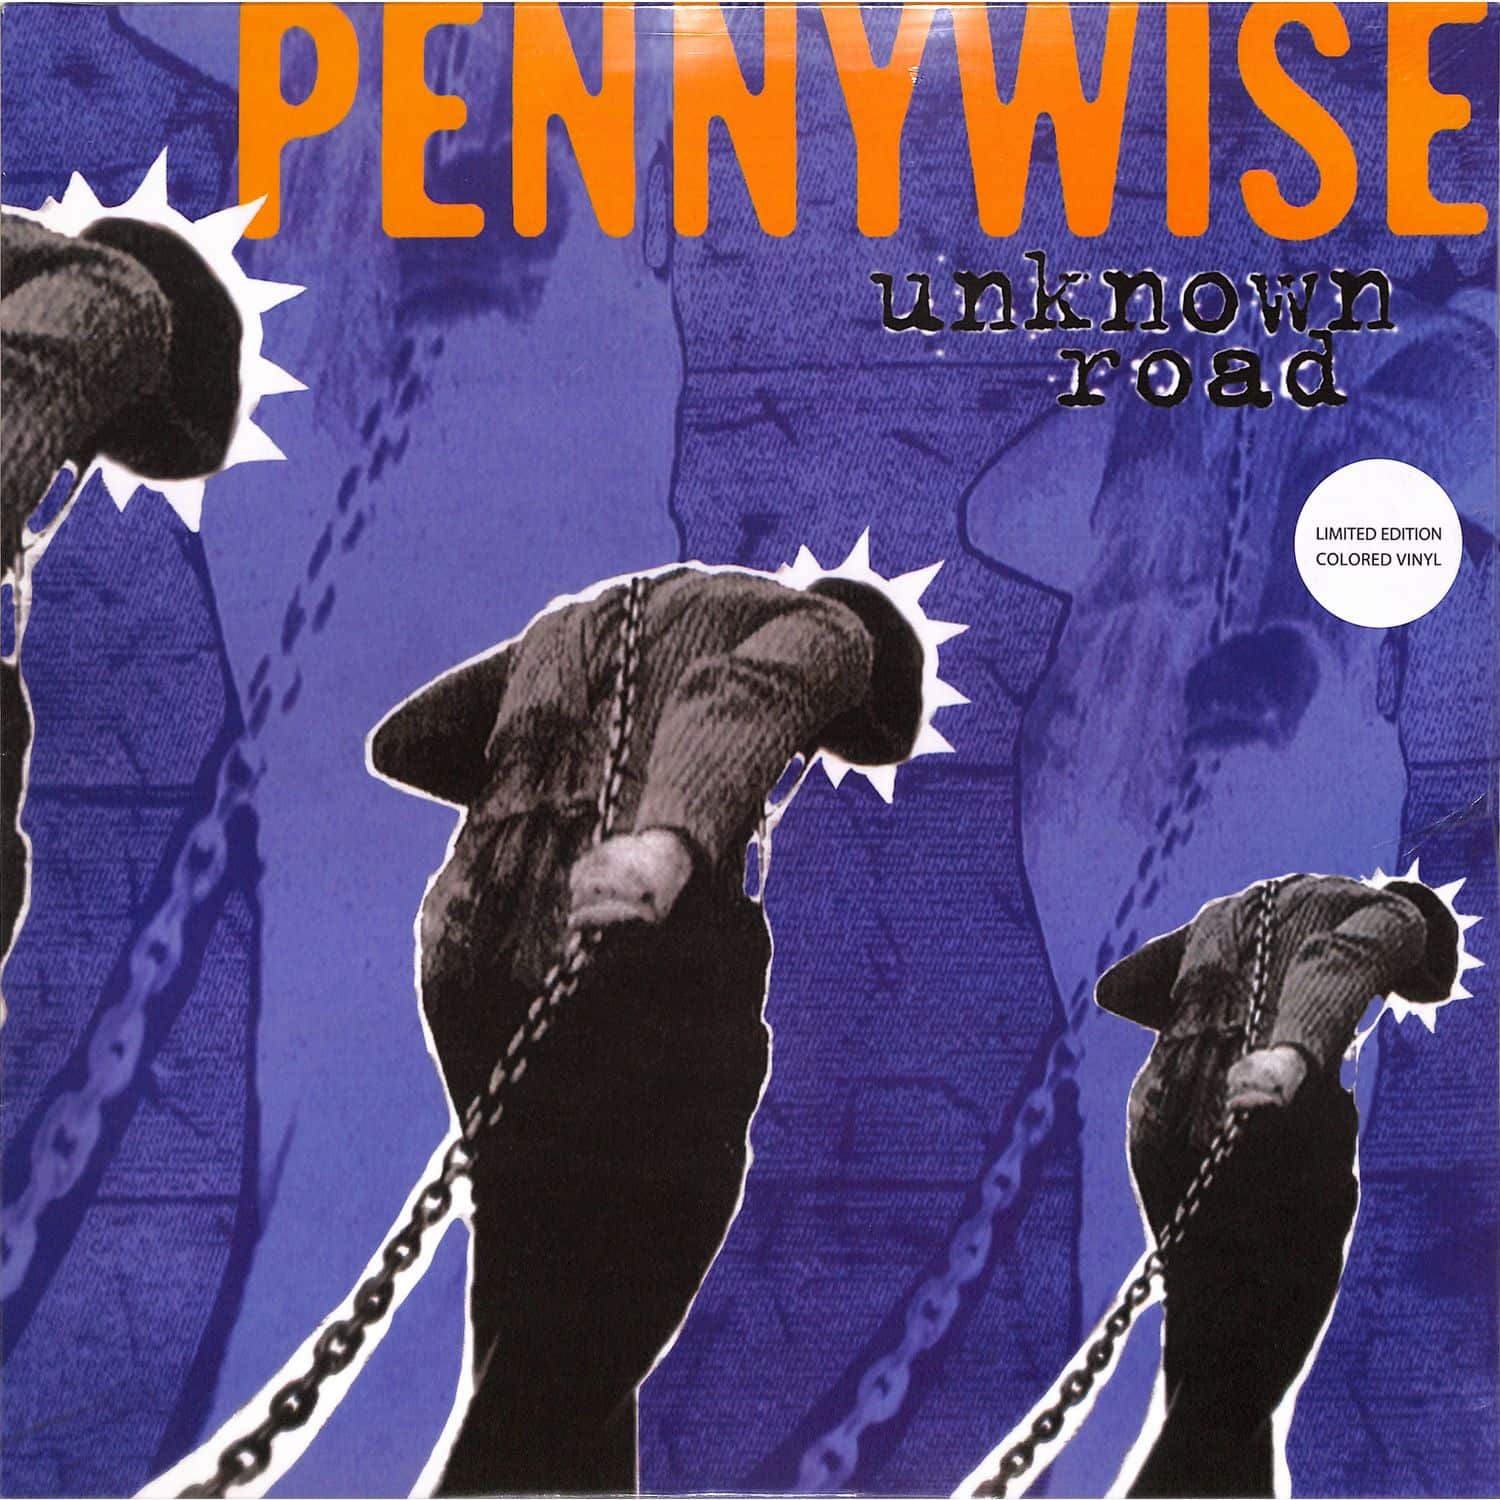 Pennywise - UNKNOWN ROAD 